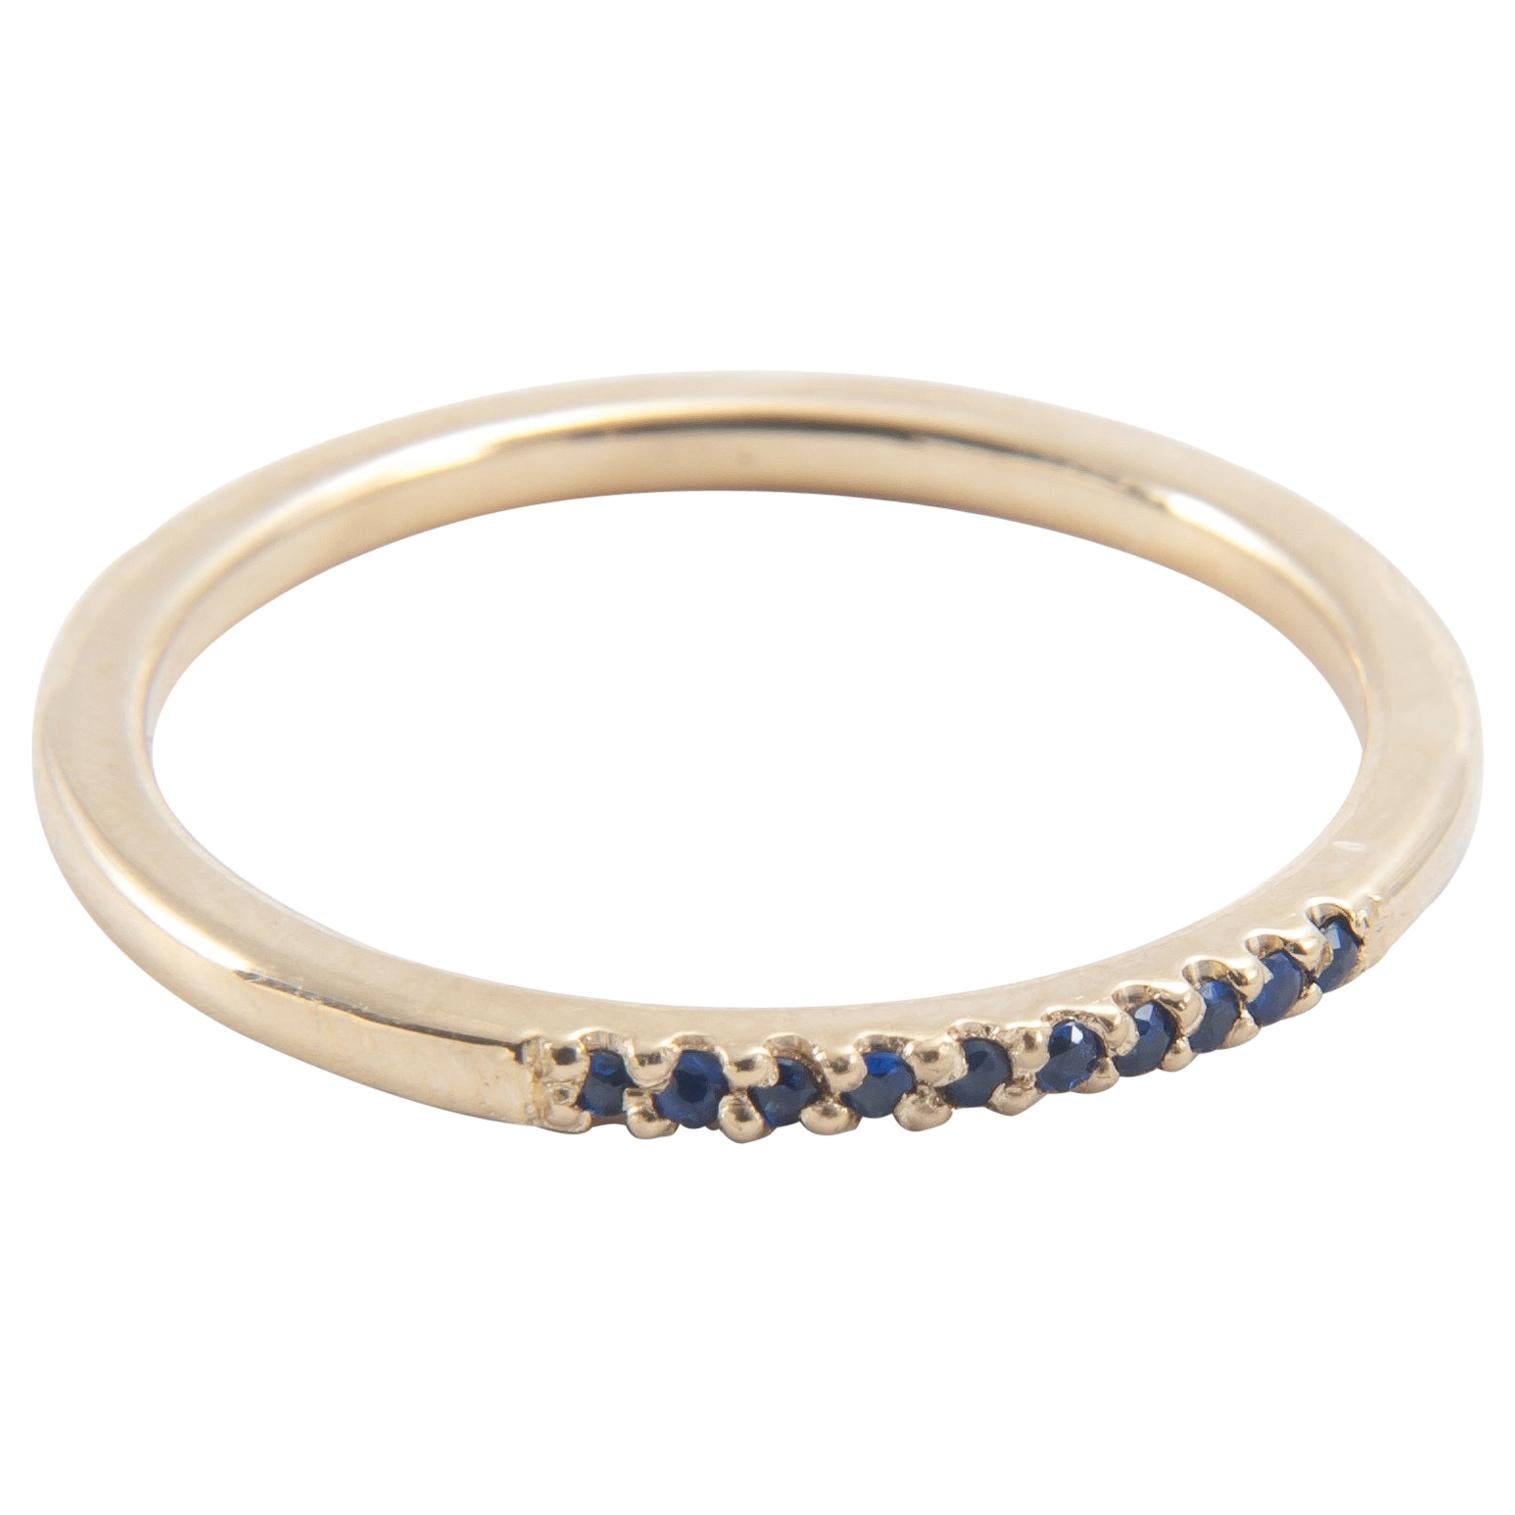 Adding a subtle pop of color, this ring is the perfect addition to a stack, or a simple statement on its own.

18K yellow gold band encrusted with pave set 0.03” blue sapphires.